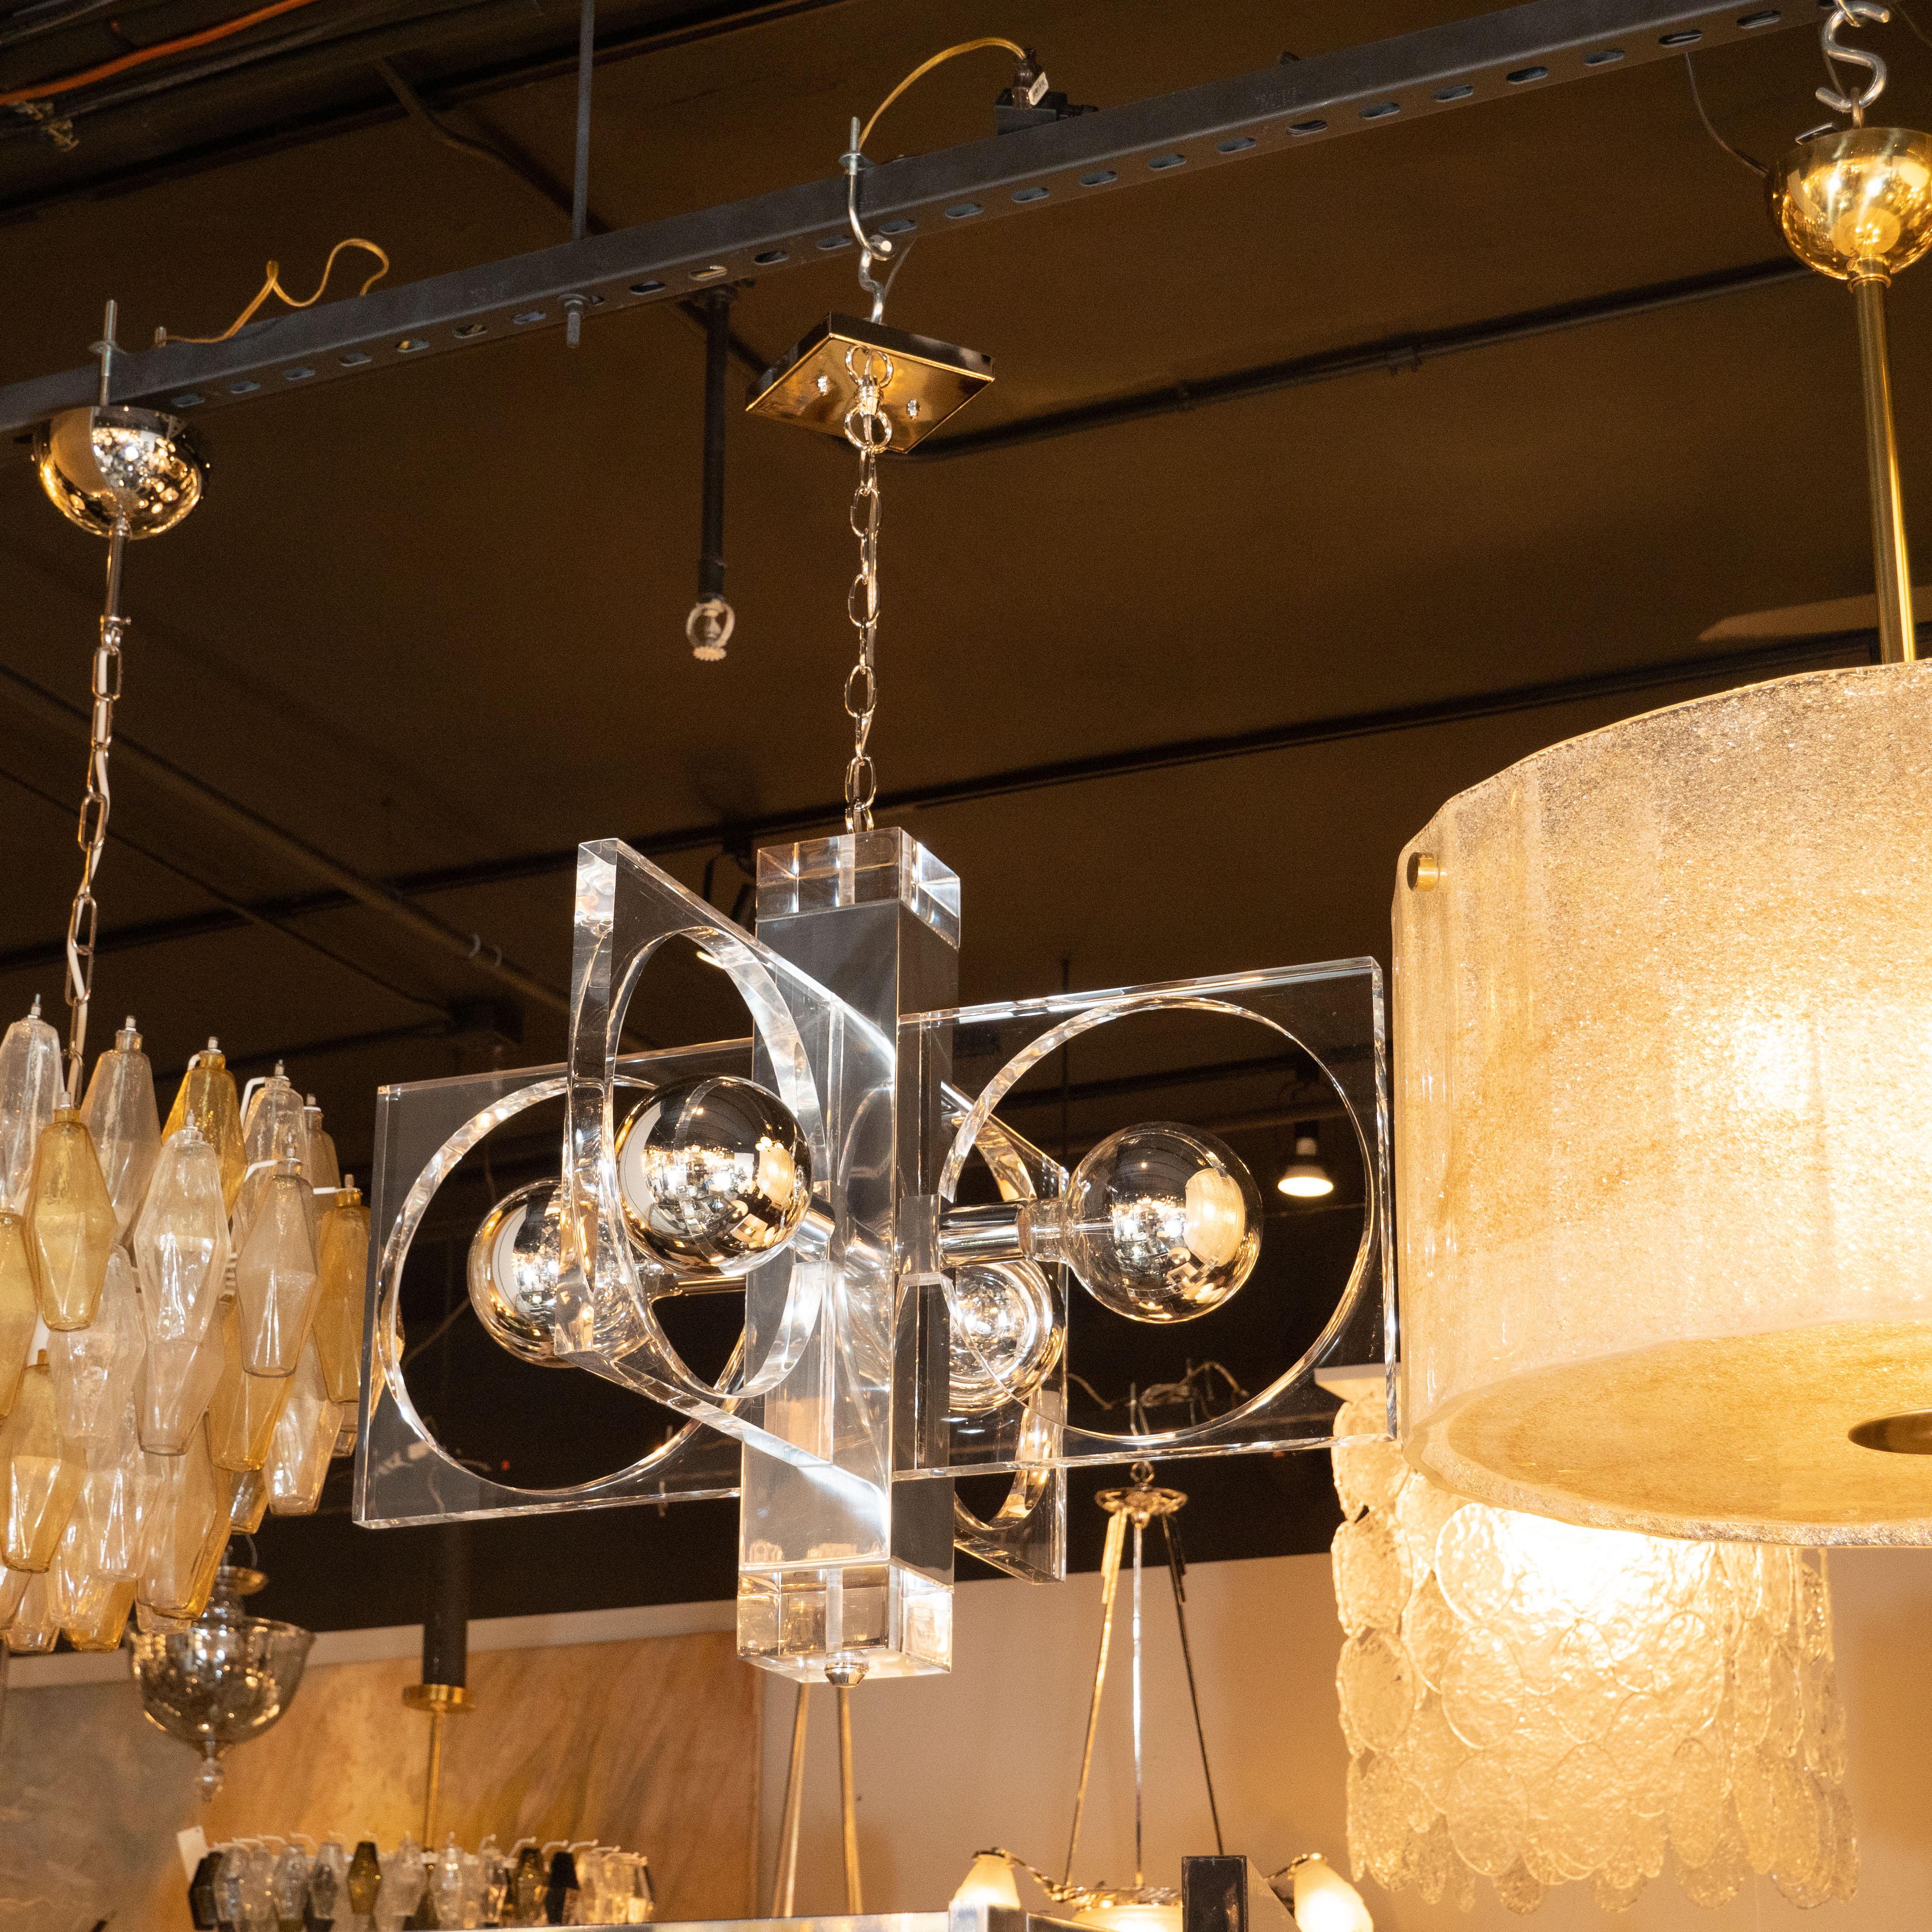 This chic and graphic Mid-Century Modern chandelier was realized in the United States, circa 1970. It features a volumetric rectangular chrome body with Lucite caps on each end. Four square Lucite forms emanate outwards from each face of the body